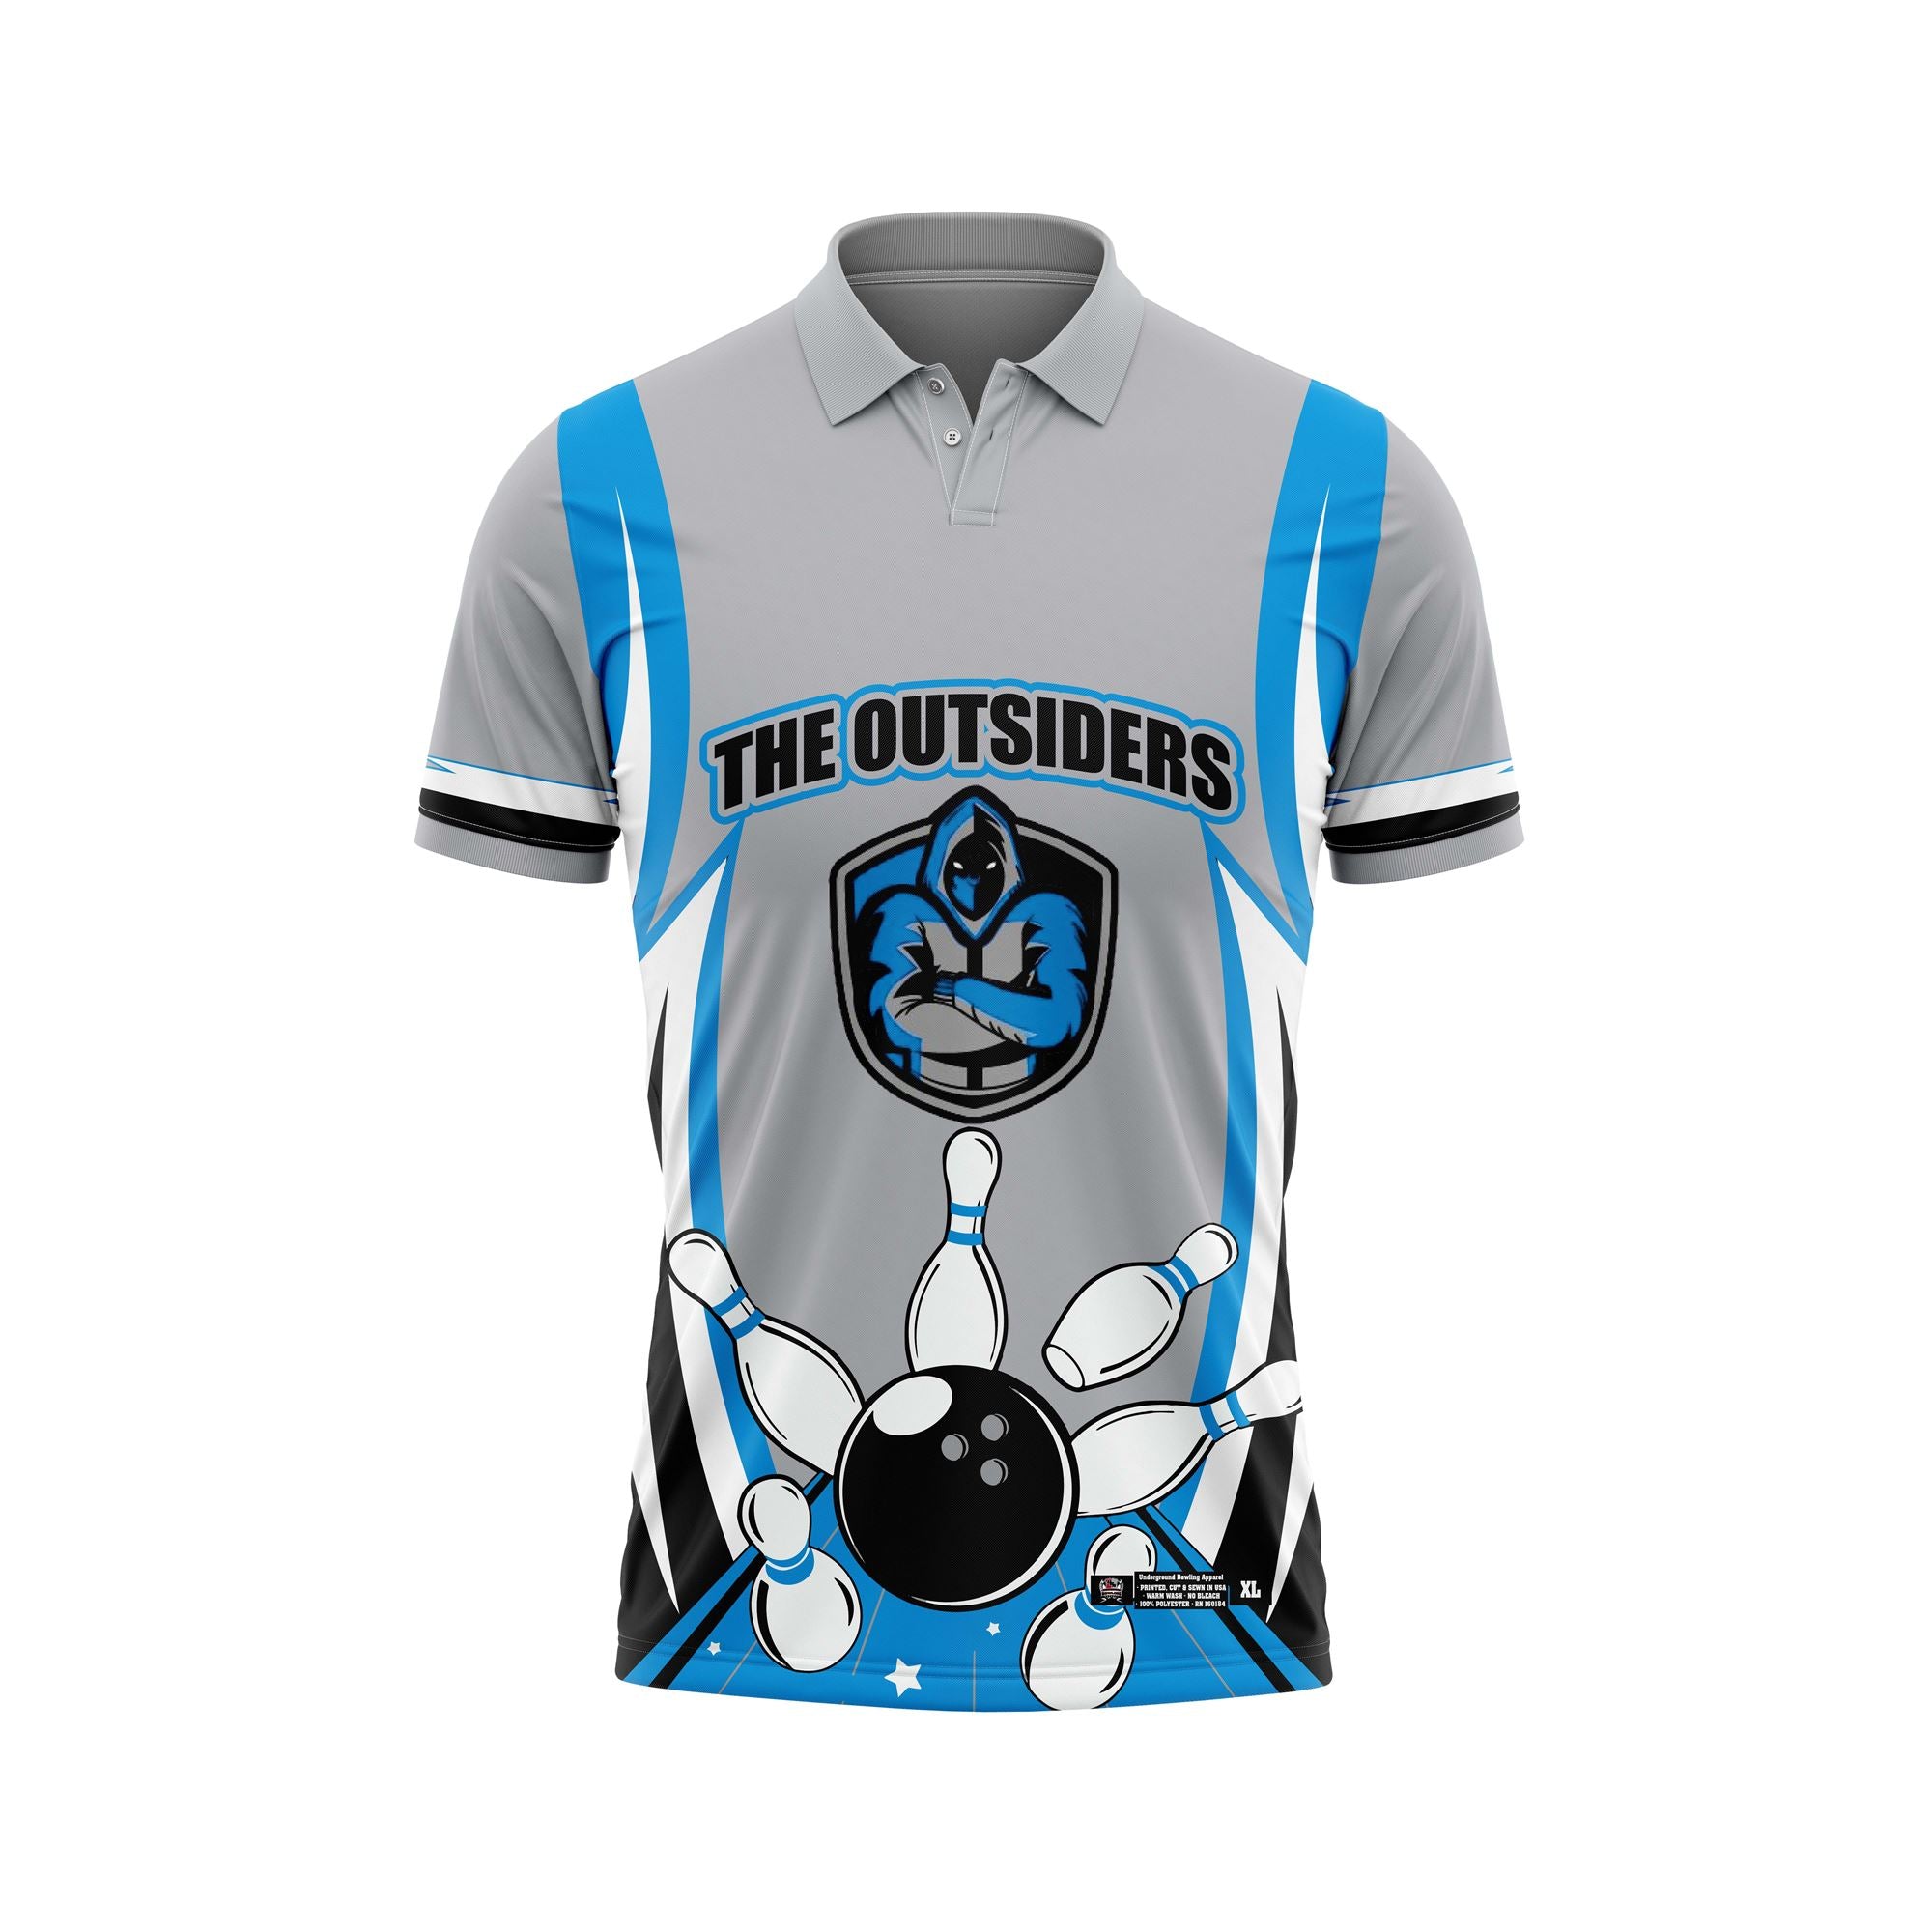 The Outsiders Grey Jersey